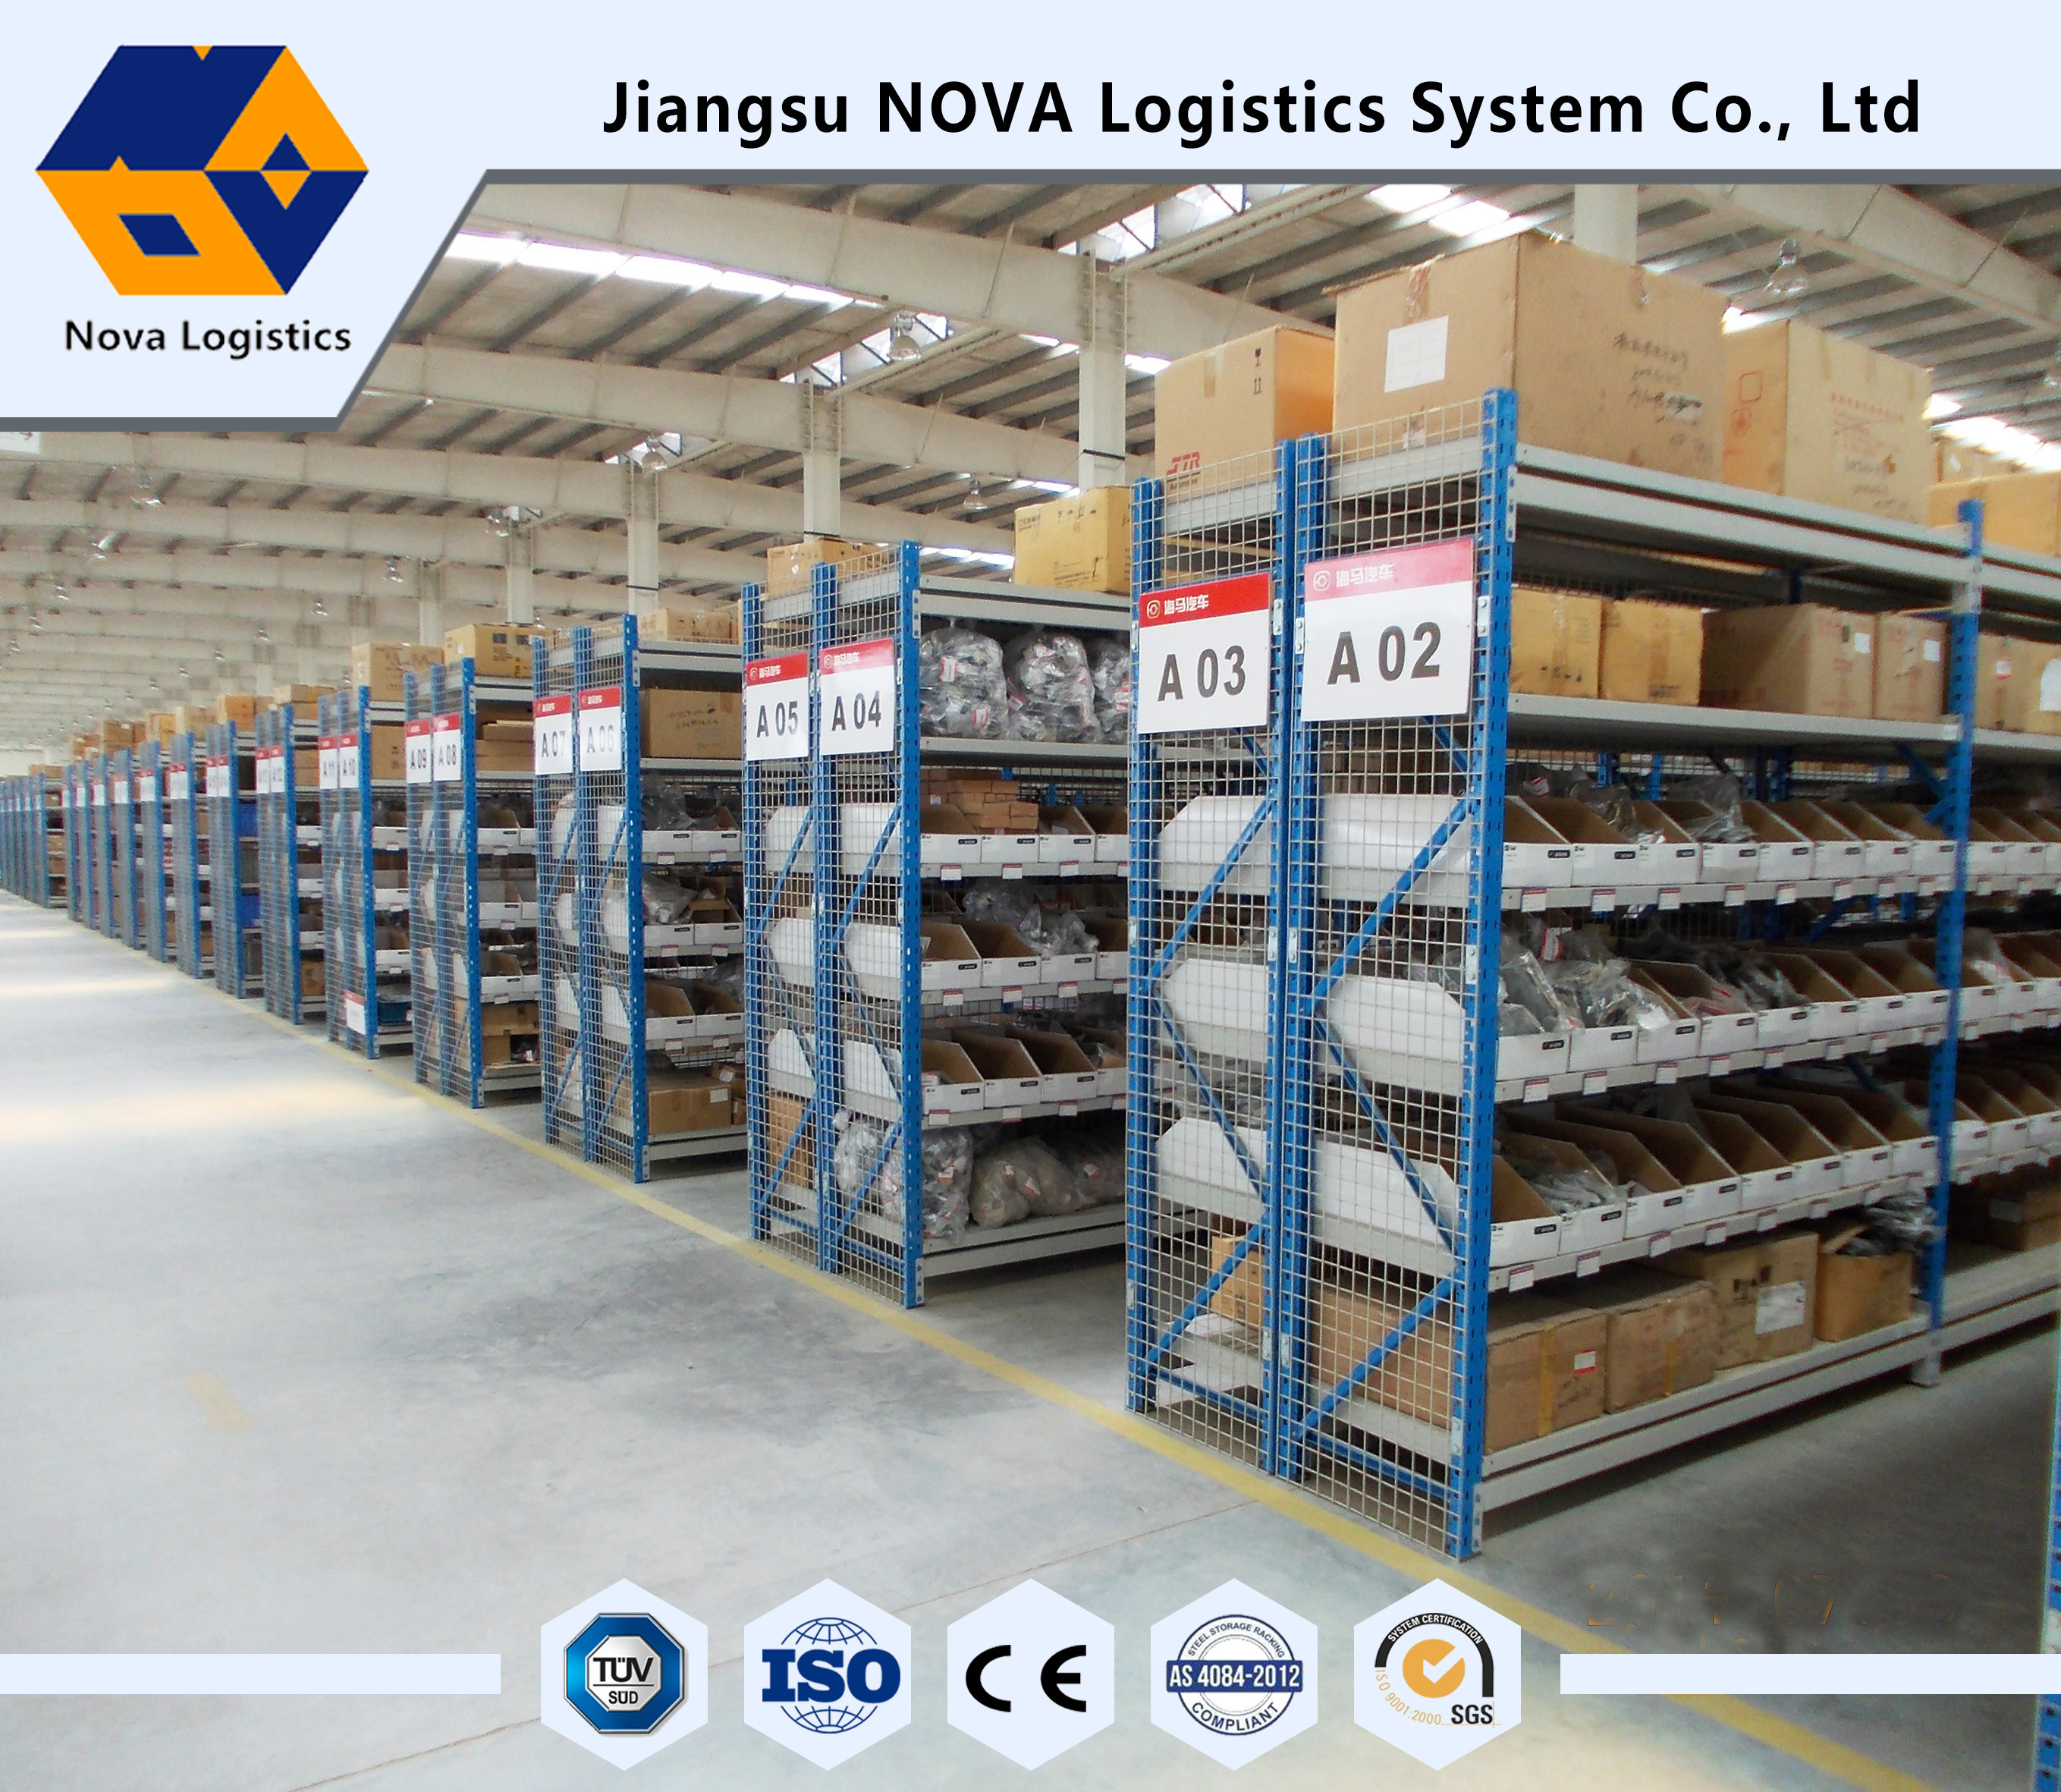 Long Span Metal Industry Selective Mobile Shelving Systems Medium Duty